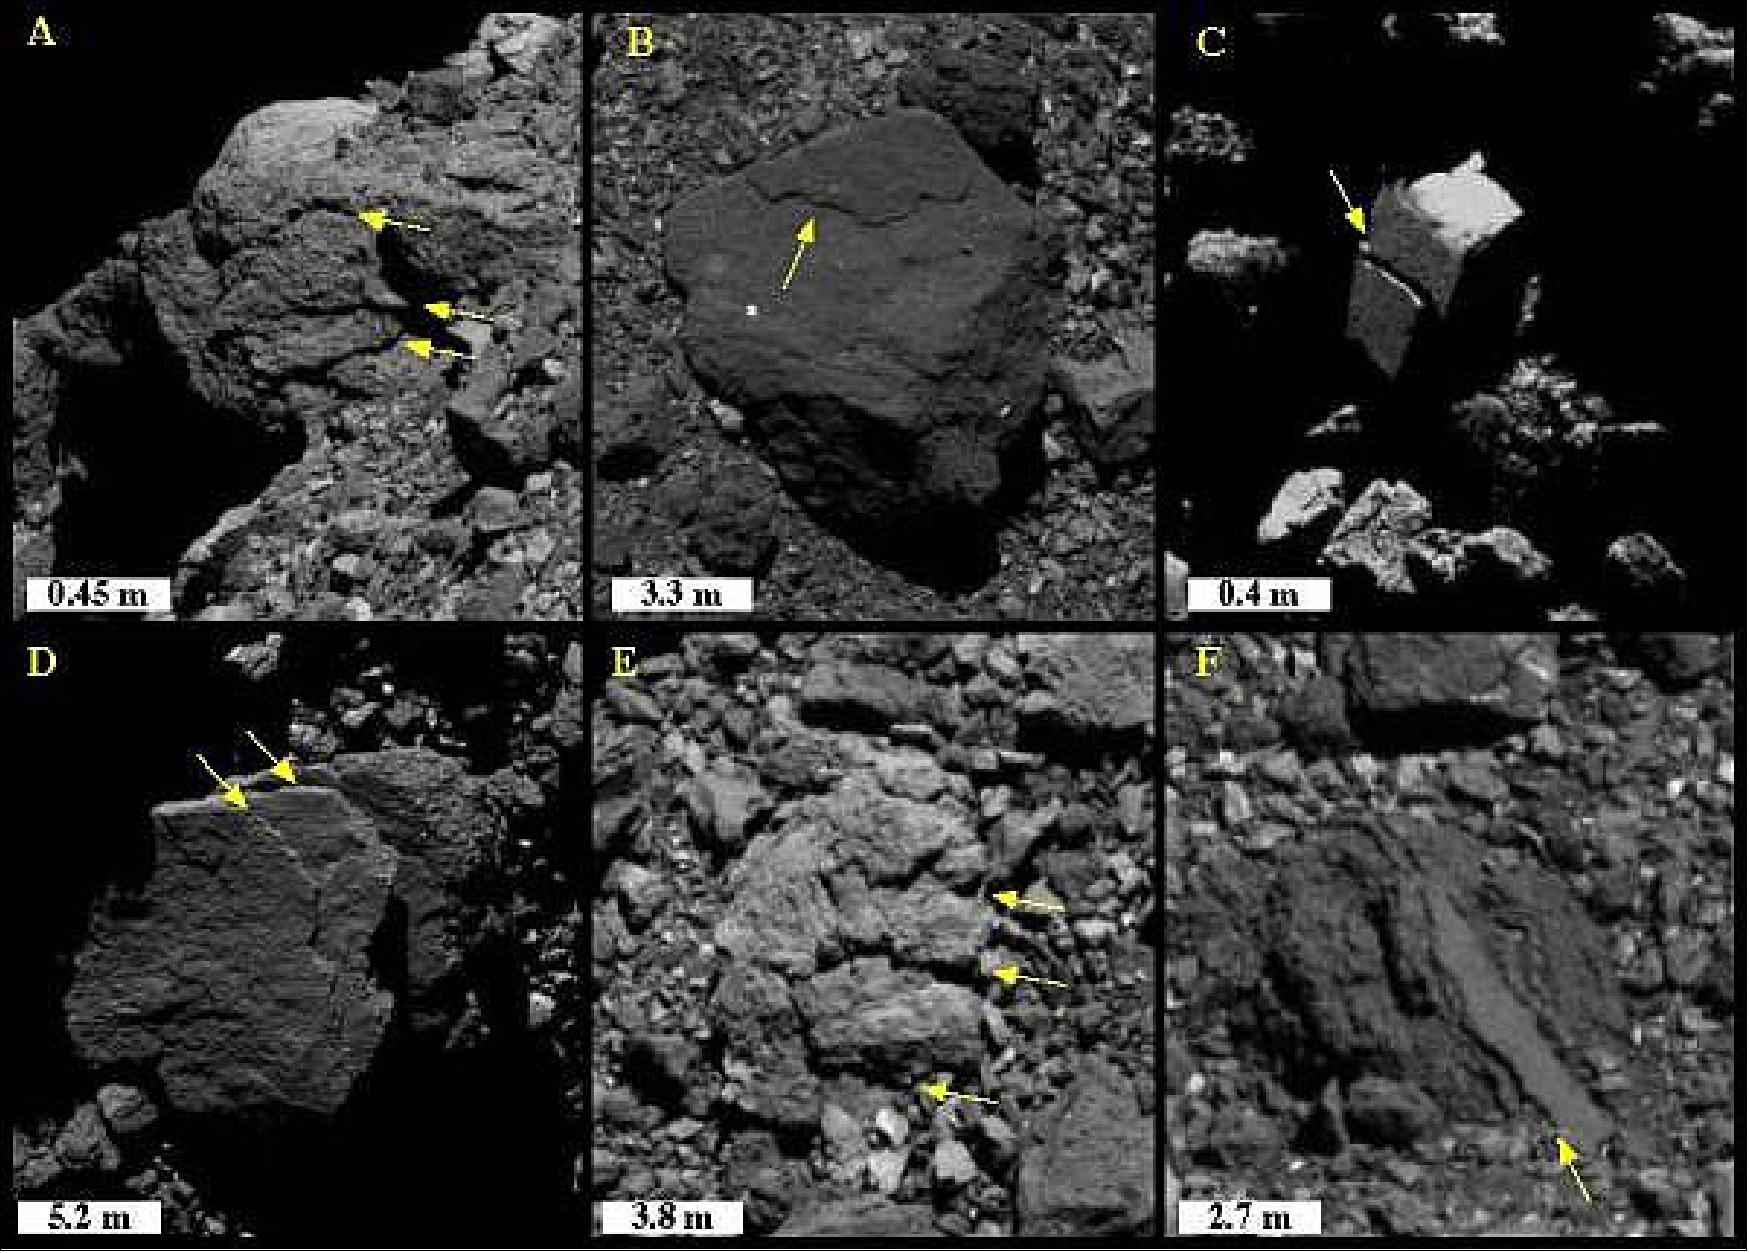 Figure 33: Exfoliation features on a cliff face (a) and on boulders (b-f) with varying size and location. The bright dome on the horizon of panel (a) is a boulder behind the exfoliating cliff (image credit: NASA/Goddard/University of Arizona)